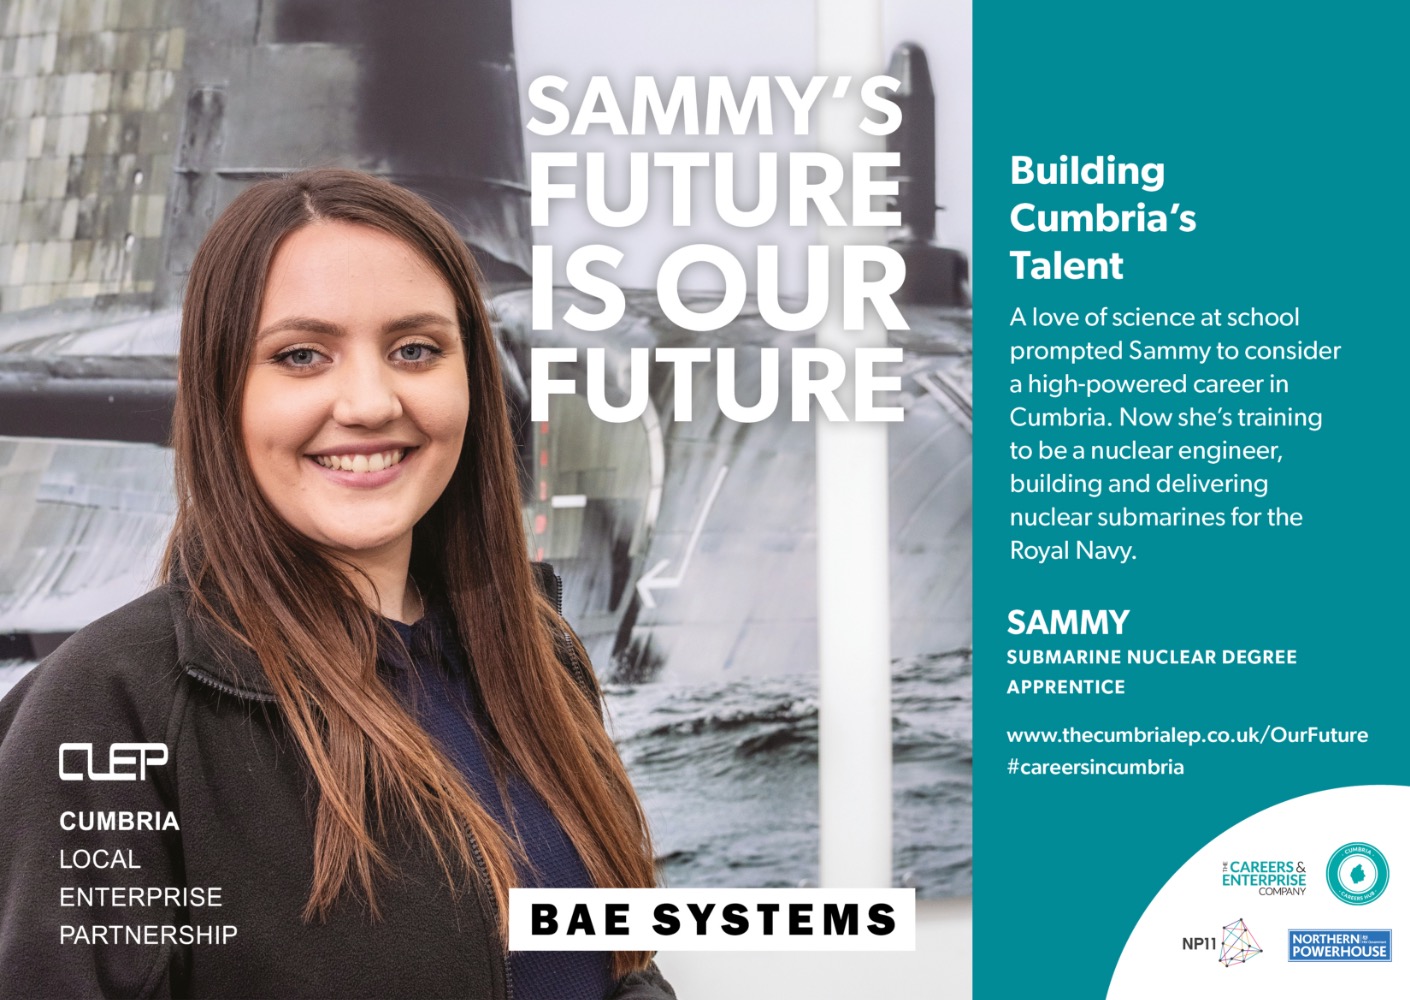 Building Cumbria's Talent - A love of science at school prompted Sammy to consider a high-powered career in Cumbria. Now she's training to be a nuclear engineer, building and delivering nuclear submarines for the Royal Navy. (Photo of Sammy, nuclear degree apprentice).